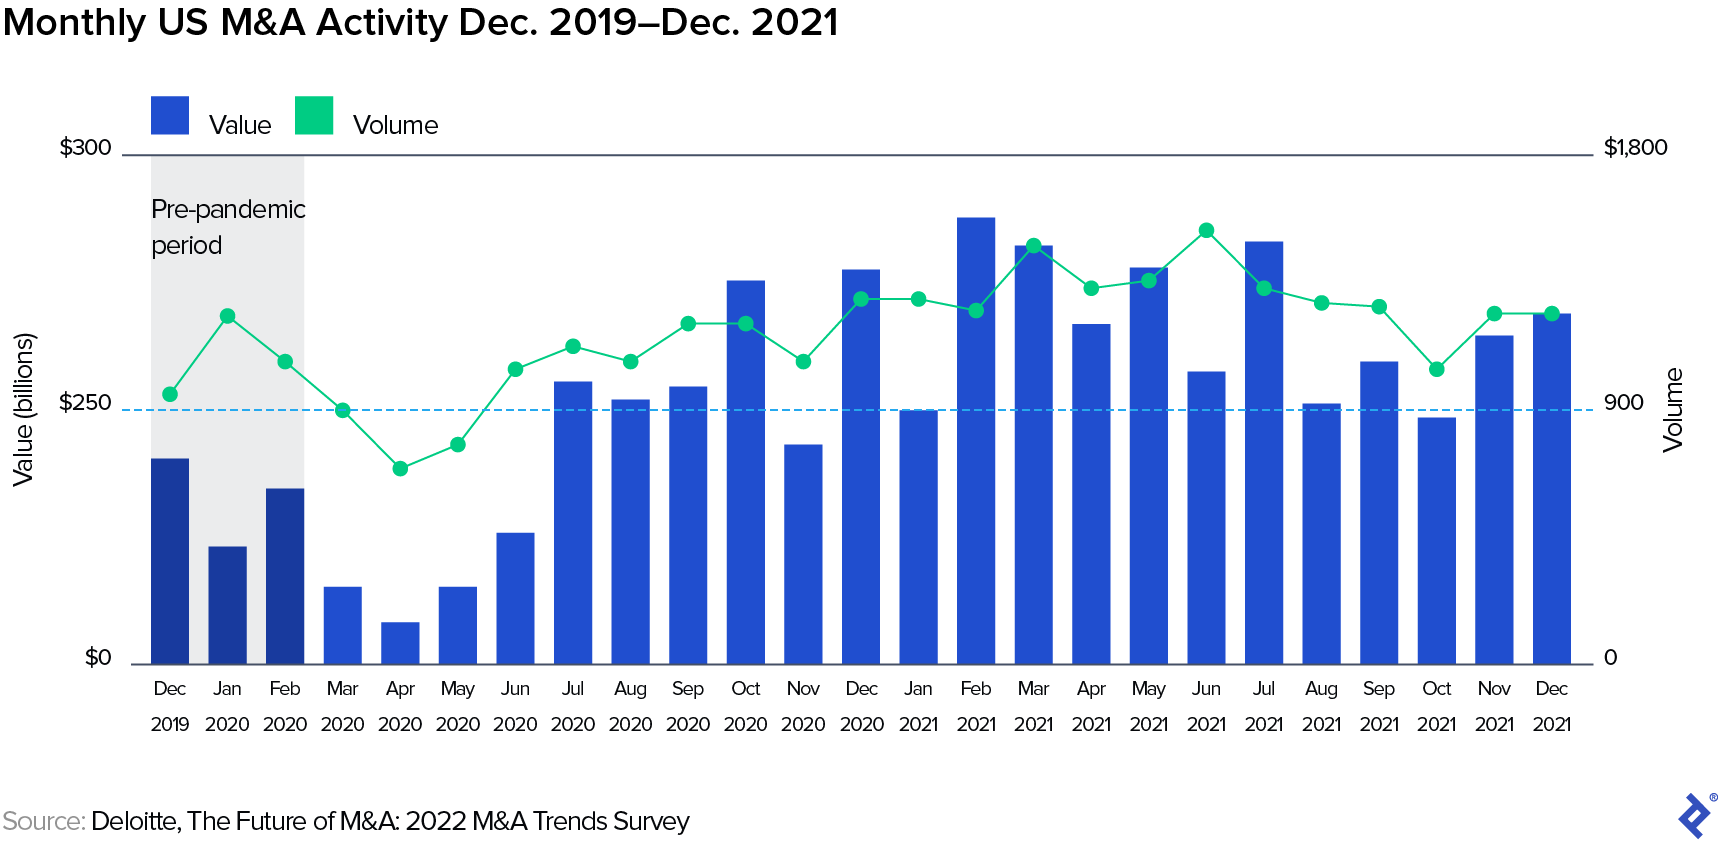 Bar and line chart titled, "Monthly US M&A Activity Dec. 2019--Dec. 2021." Bars display the monthly value of M&A deals, which rose from under $250 billion in December 2019 to over $900 billion in December 2021. An overlaid line graph shows a gradual increase in volume over the same period.